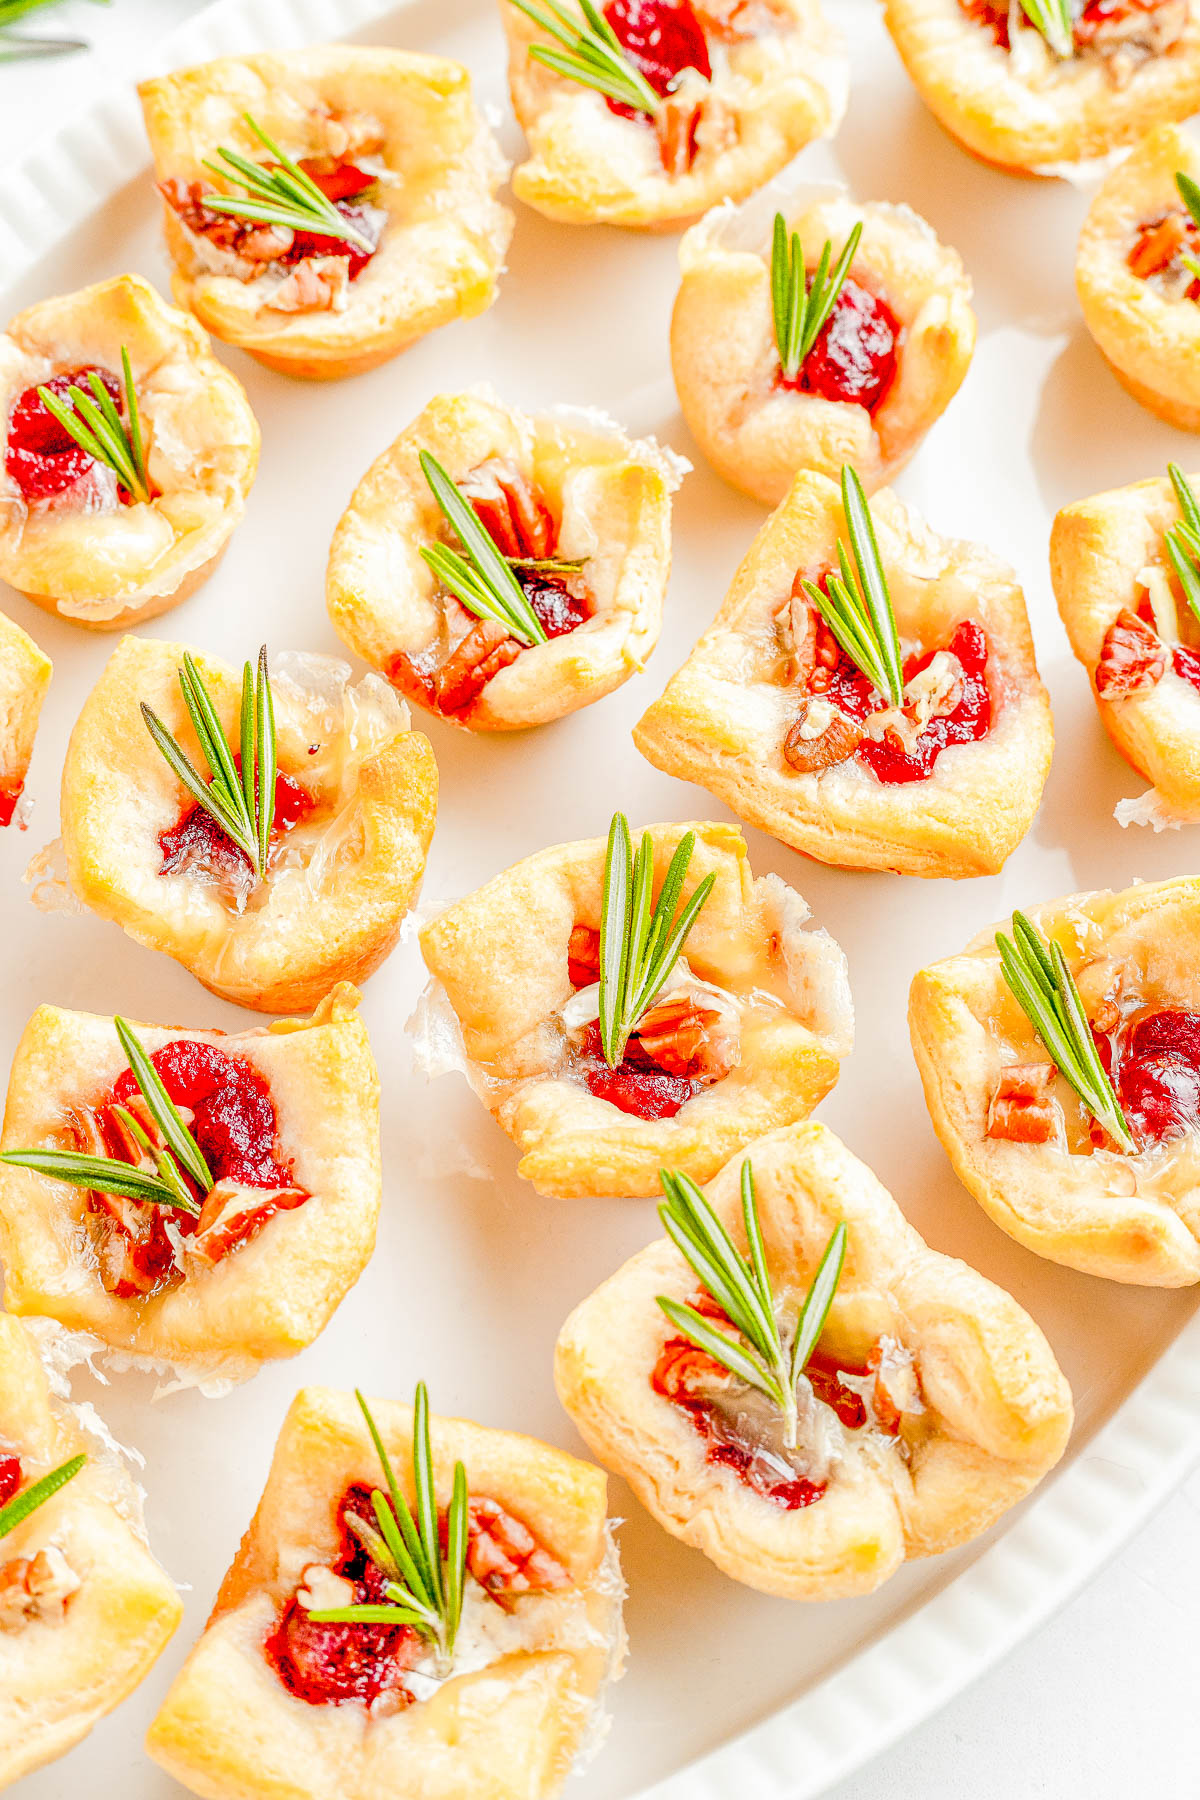 Cranberry Brie Bites - The perfect two-bite holiday appetizer recipe with melted brie cheese, sweet-tart cranberry sauce, and fresh rosemary all nestled inside a buttery soft crust! An EASY appetizer recipe with just 4 main ingredients that's ready in 30 minutes! PERFECT for Thanksgiving celebrations, holiday and Christmas parties, or for New Year's Eve!